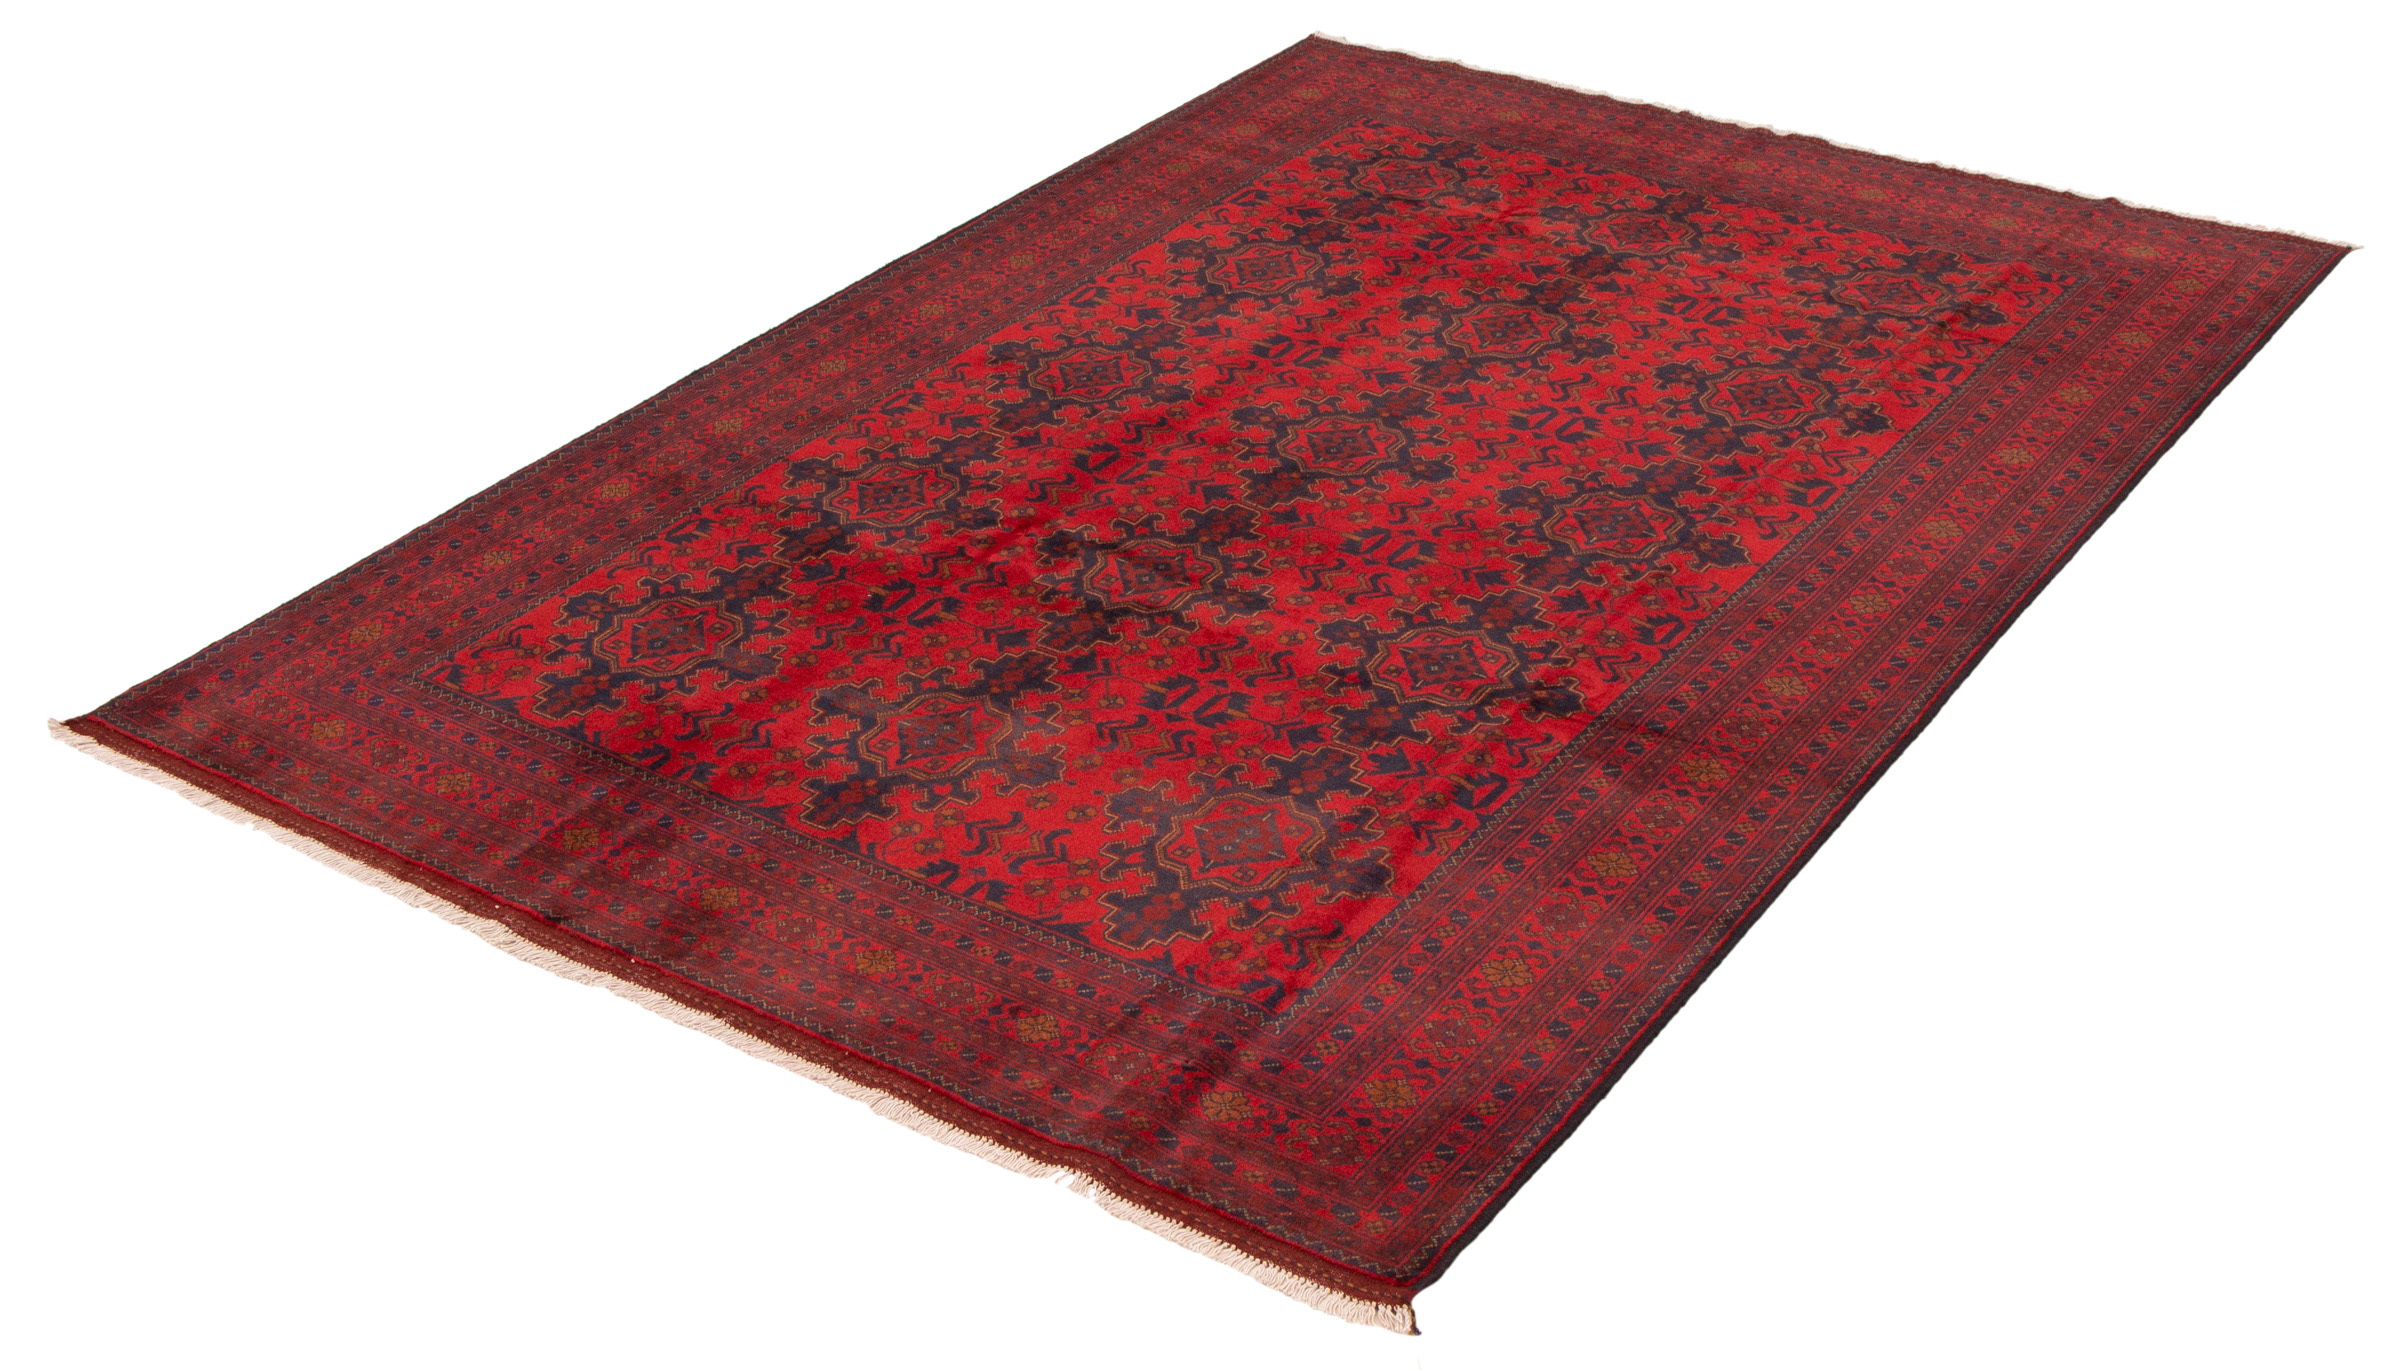 Bedroom eCarpet Gallery Area Rug for Living Room Finest Khal Mohammadi Bordered Red Rug 4'9 x 6'4 Hand-Knotted Wool Rug 359238 